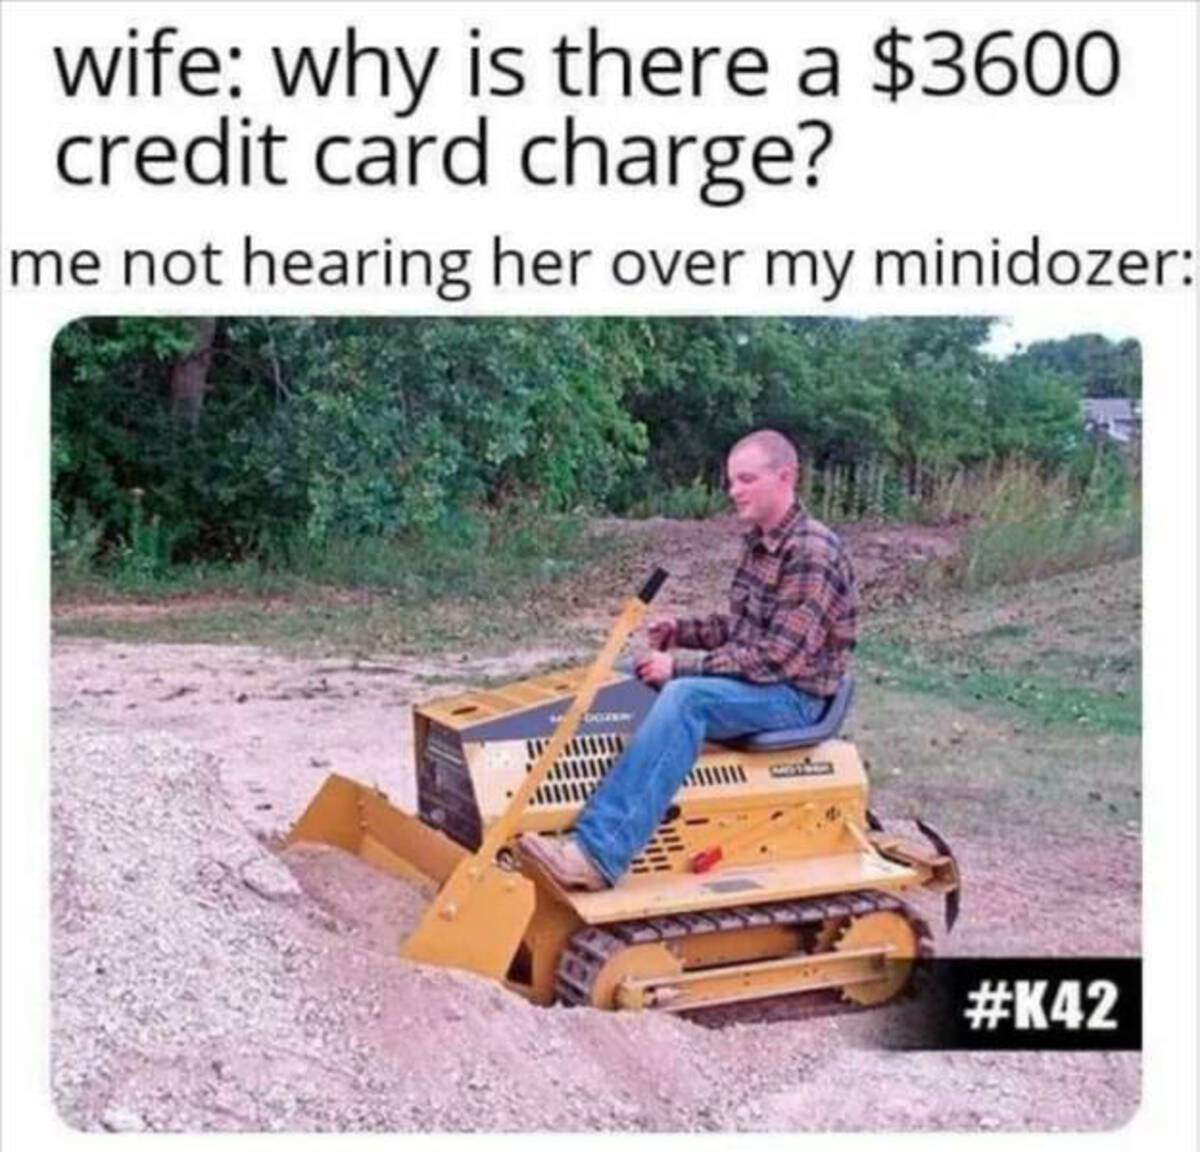 Skid Steer Solutions - wife why is there a $3600 credit card charge? me not hearing her over my minidozer Logxem